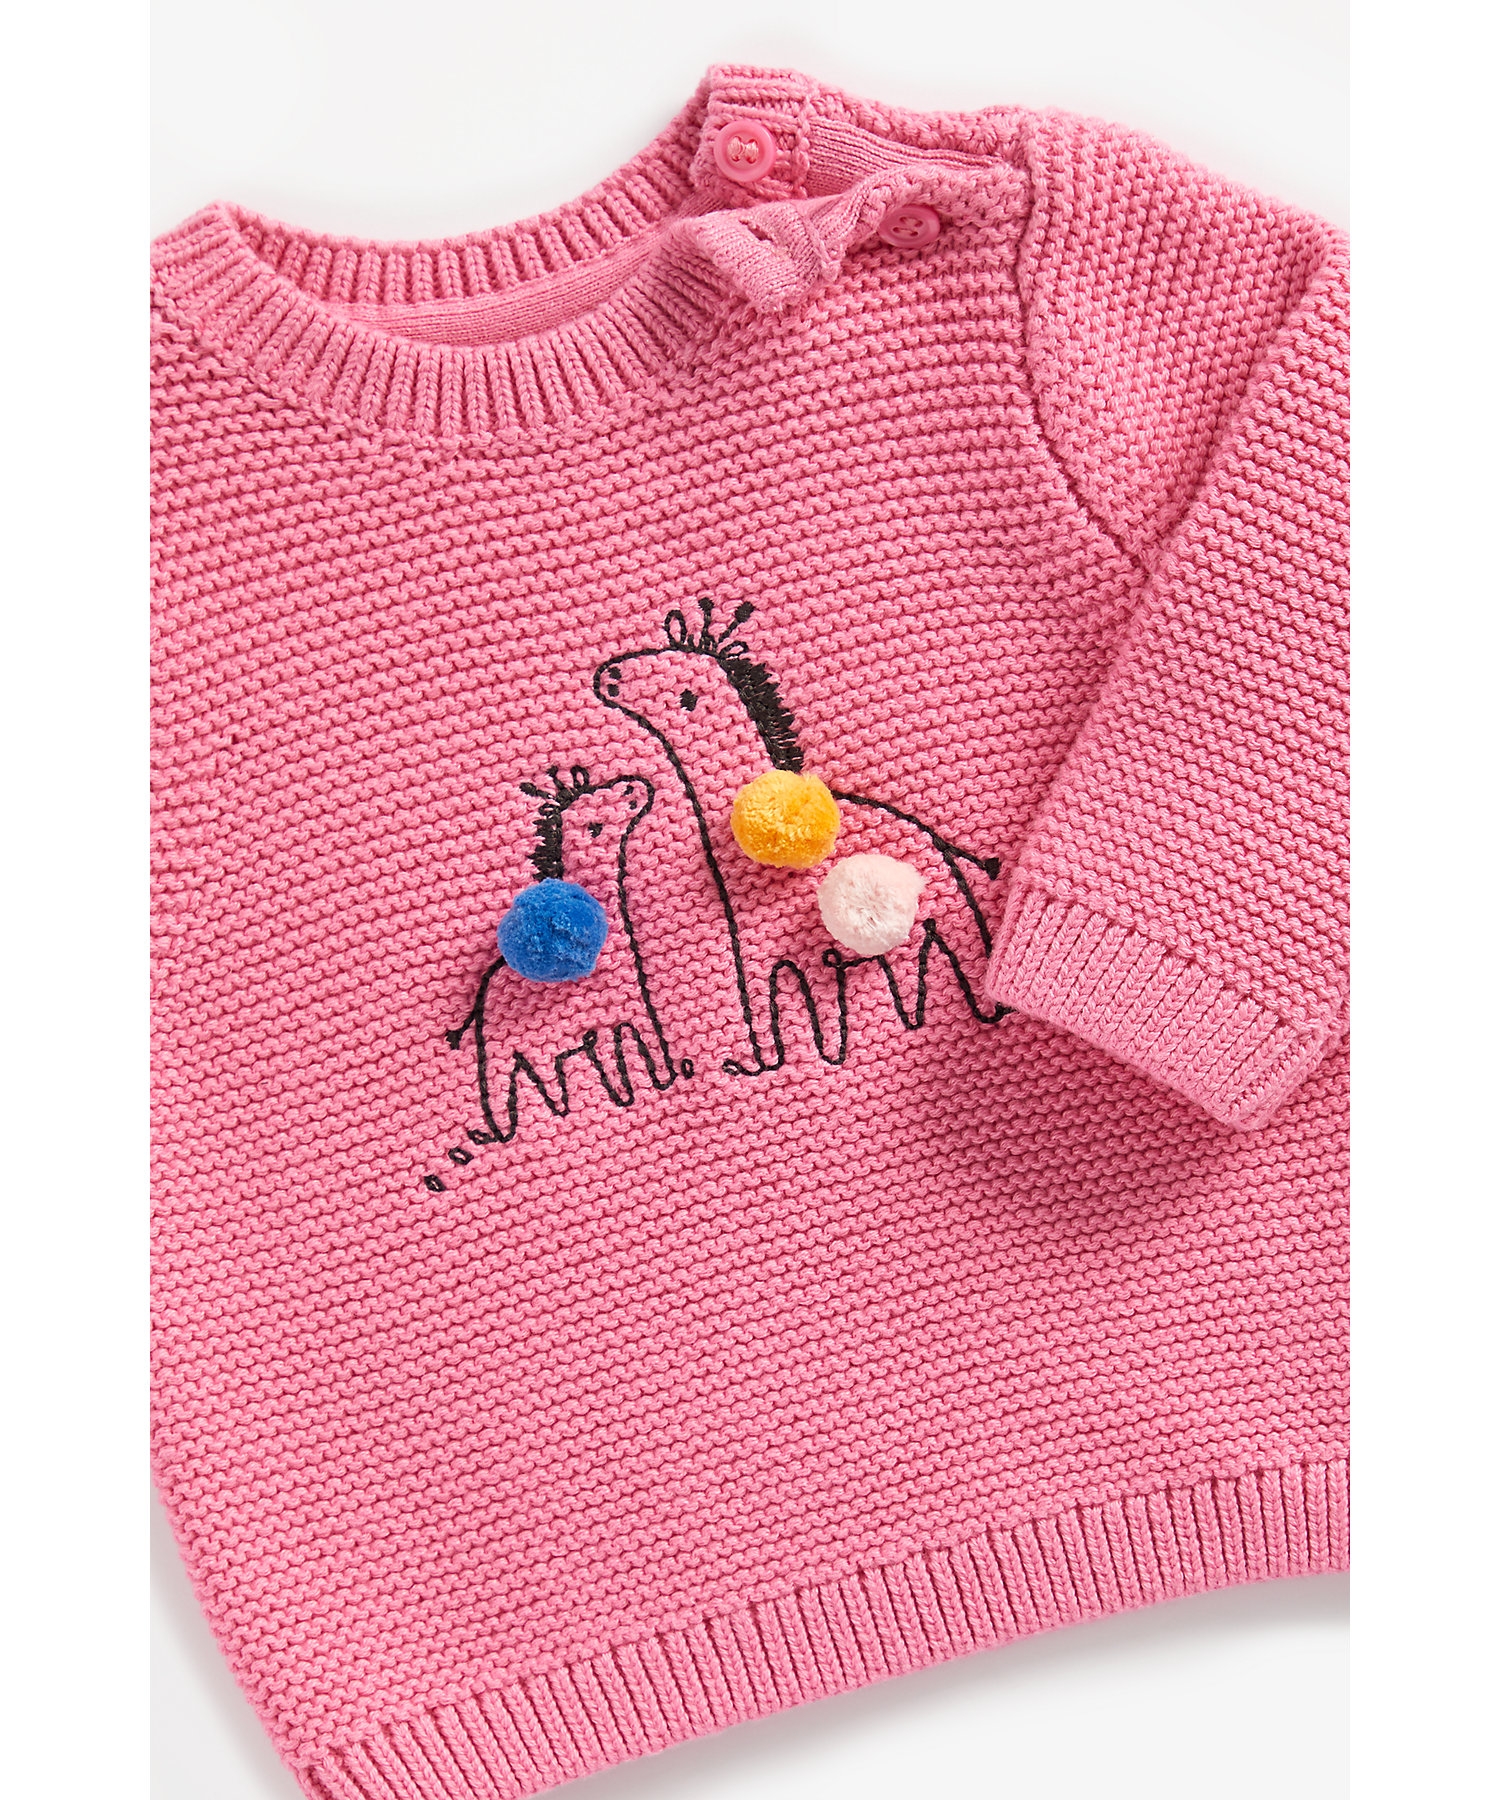 Mothercare | Girls Full Sleeves Sweater Zebra Embroidery And Pom Pom Details - Pink 2